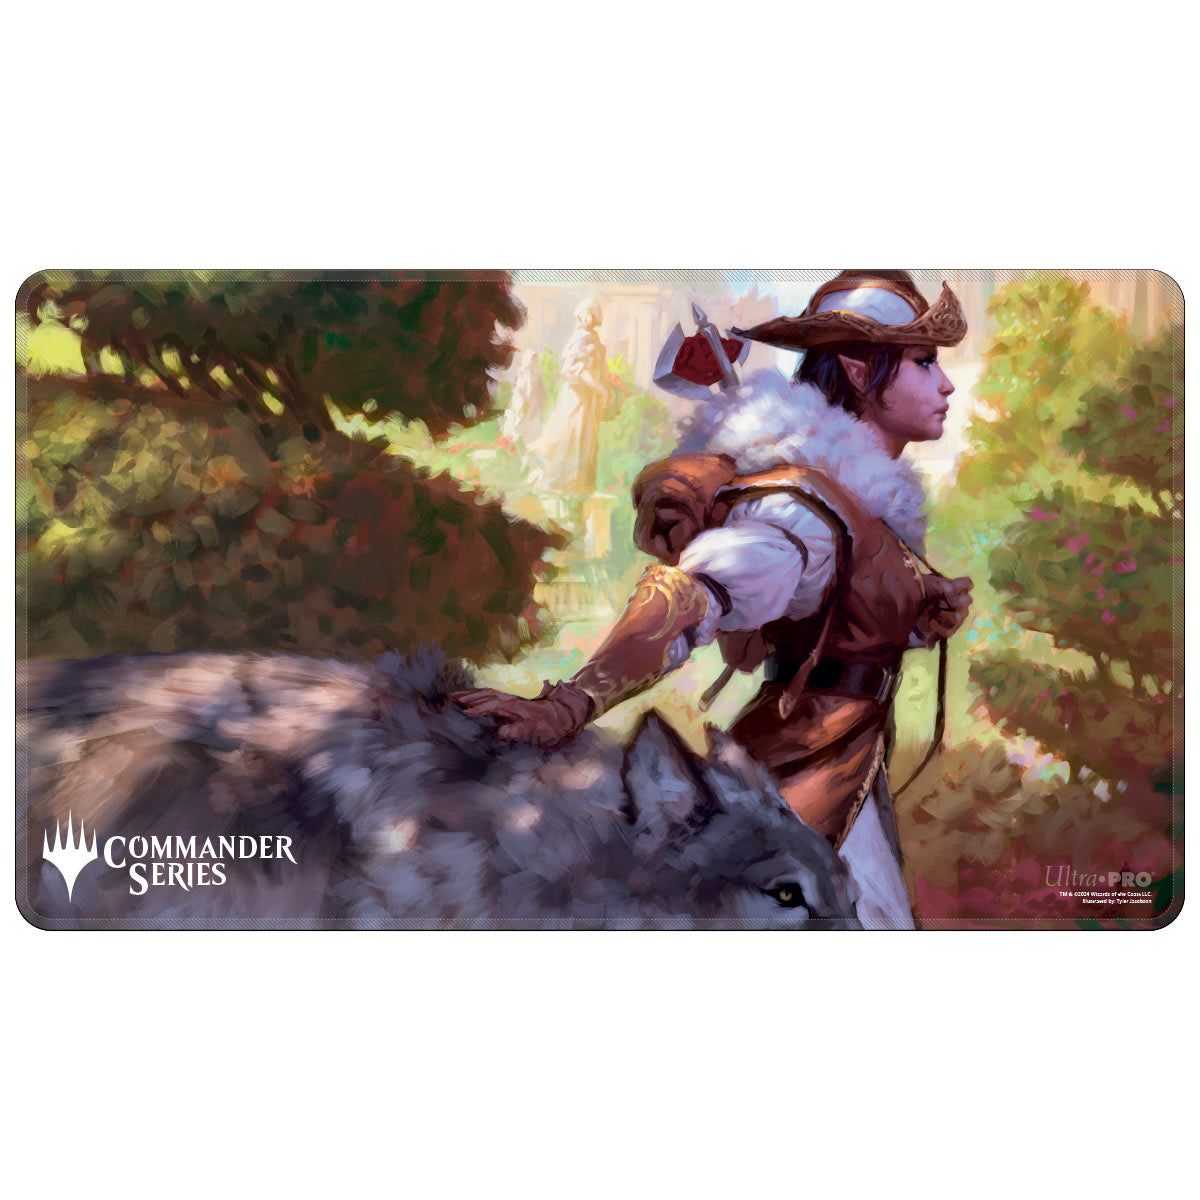 Magic: the Gathering - Stitched Playmat: Commander Series 2 - Selvala - Bards & Cards